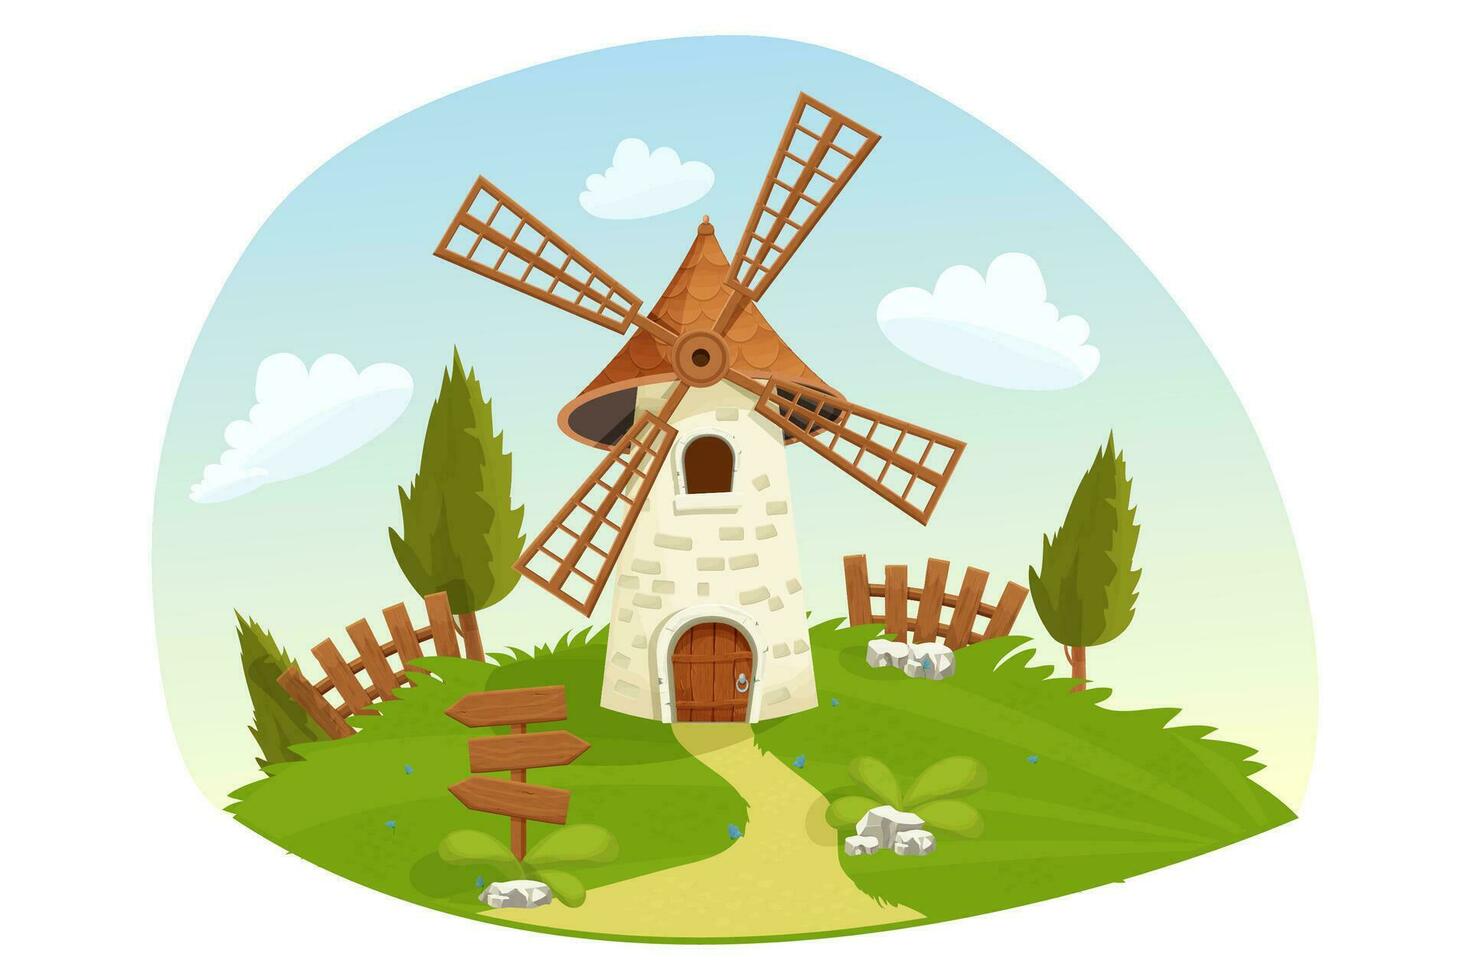 Windmill fairy landscape with wooden fence, grass, trees, farming in cartoon style isolated on white background. Retro, rural building, tower with wooden propeller. vector